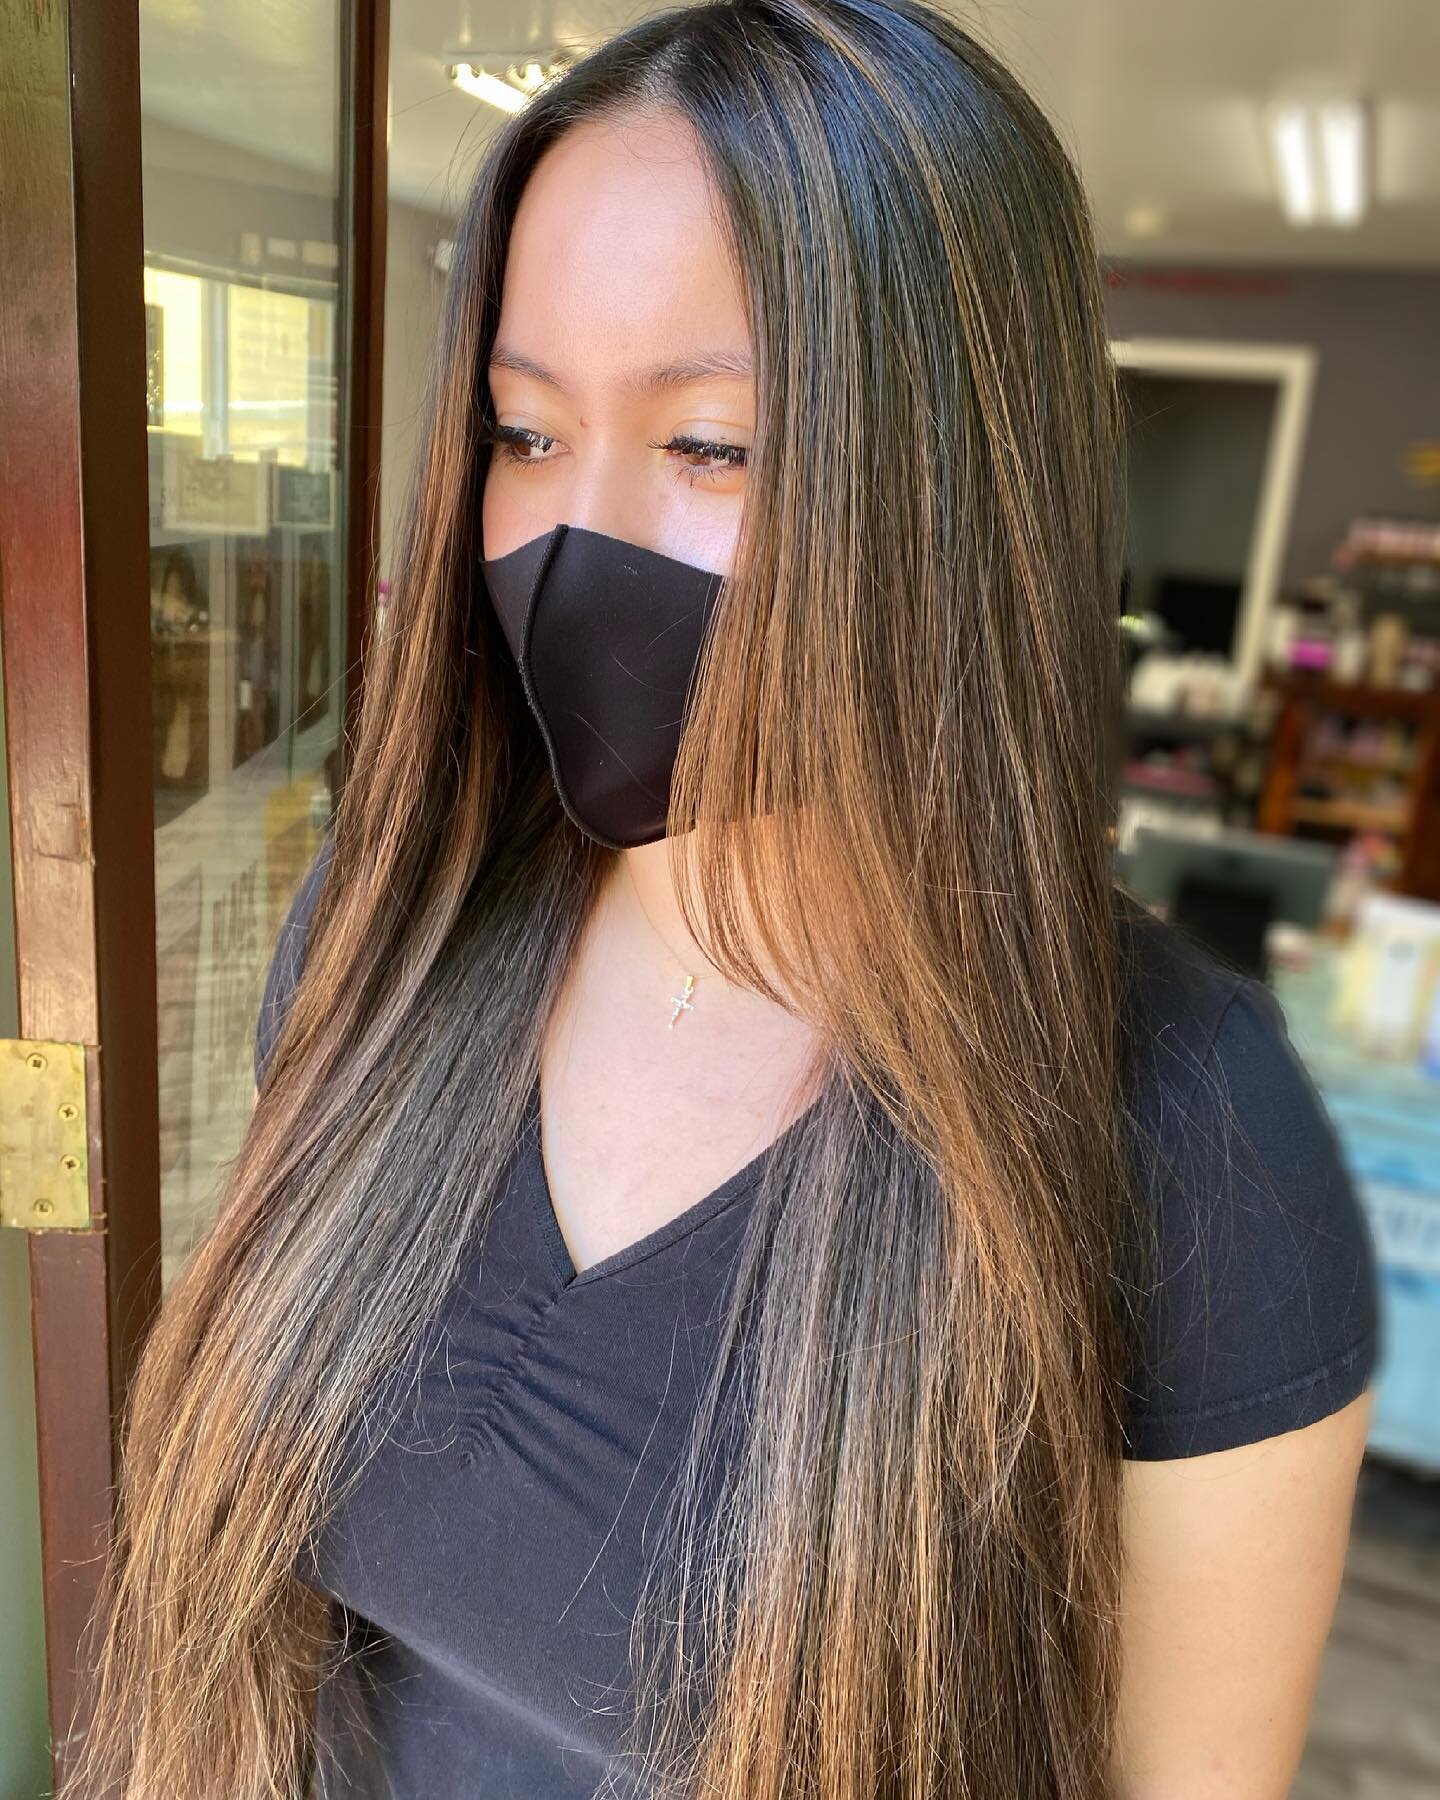 Caramel Kisses | Balayage ft Baby Lights ✨ hair by @meli_melts 
When it comes to balayage everything is customizable. Some crave dimension, some want low maintenance, some want a full transformation. Im here for alllll of it! 
@lorealpro to tone, @da